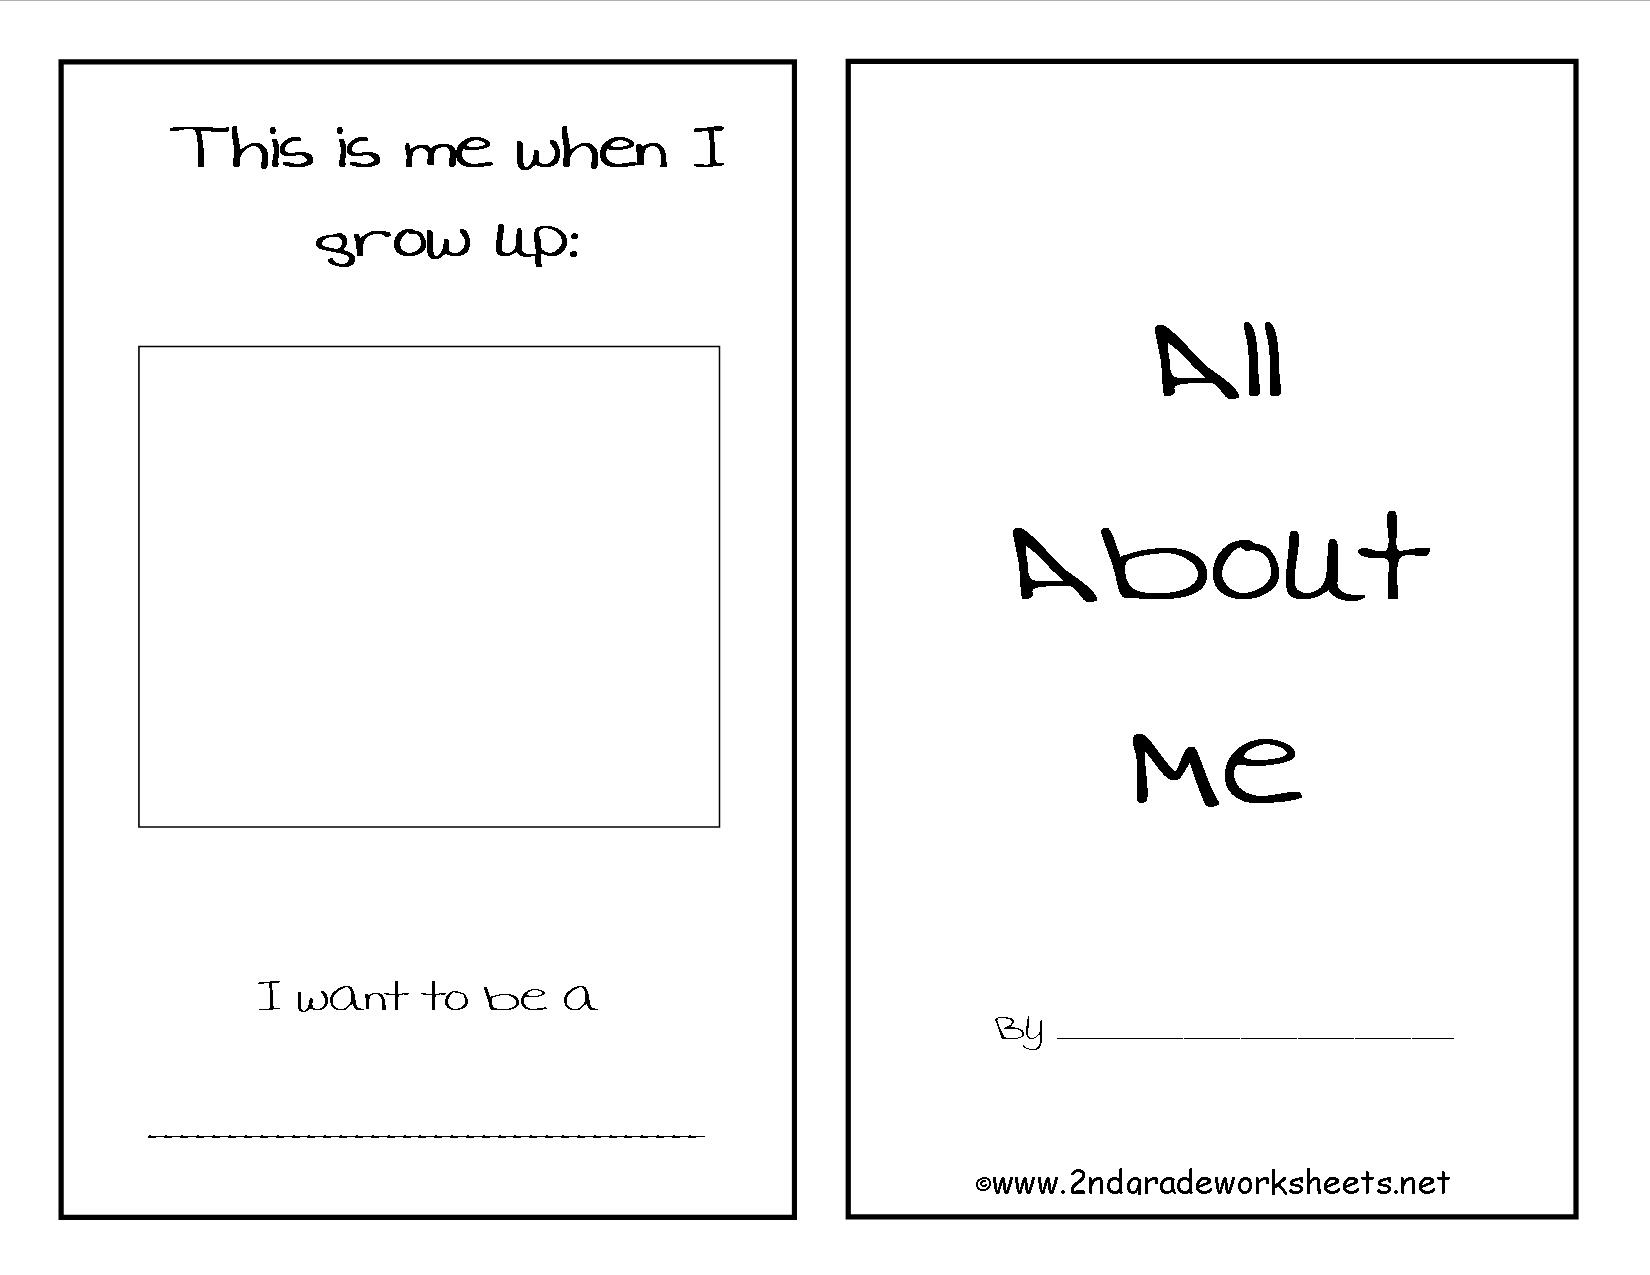 Free Back To School Worksheets And Printouts - Free Printable | Printable School Worksheets